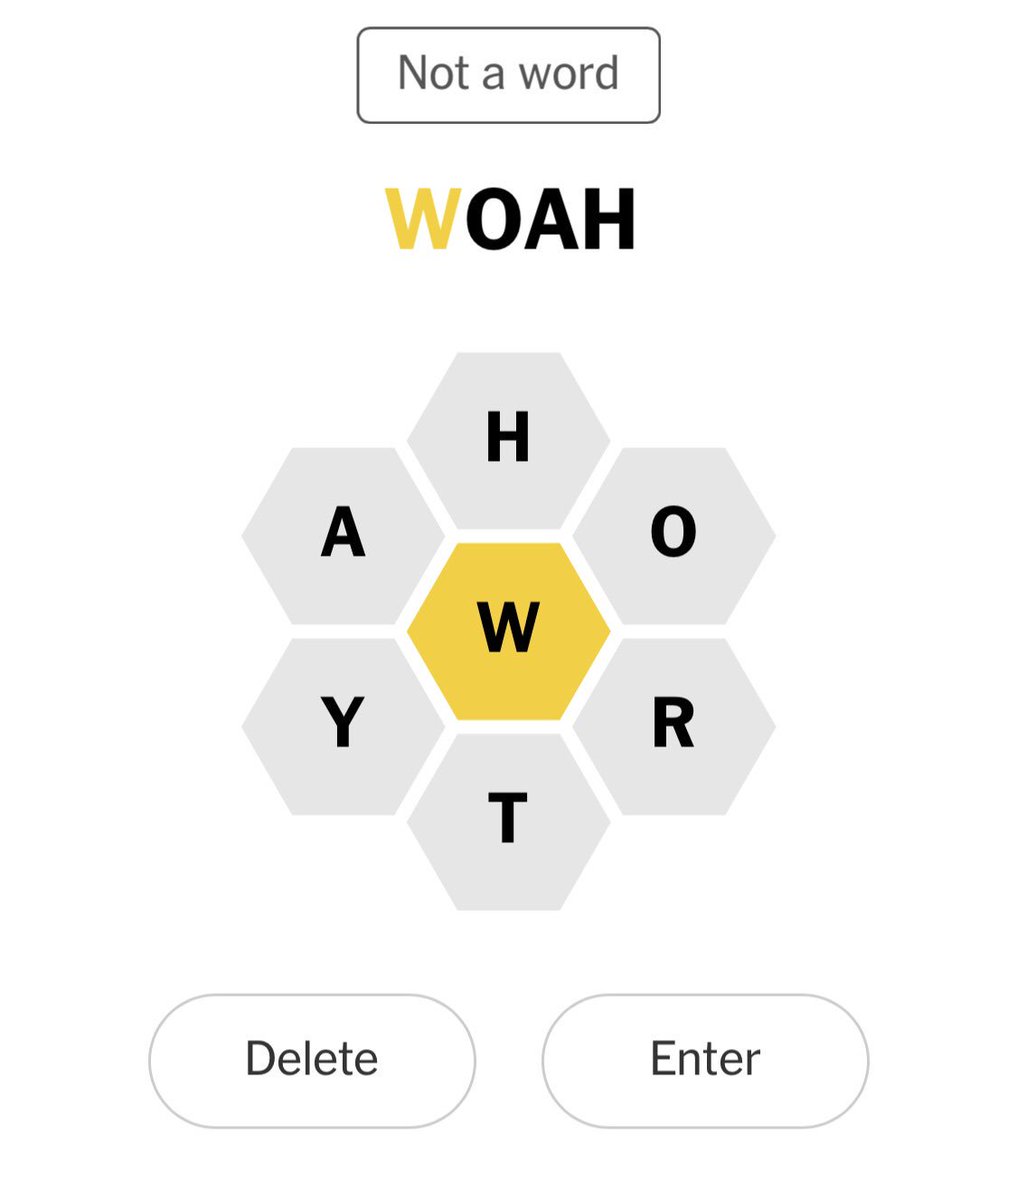 Sam Ezersky En Twitter Aaaand We Re Live Spelling Bee Is Now Available For All Nytimes Subscribers In Digital Form With A New Puzzle On The Crosswords Page Every Day Edited By